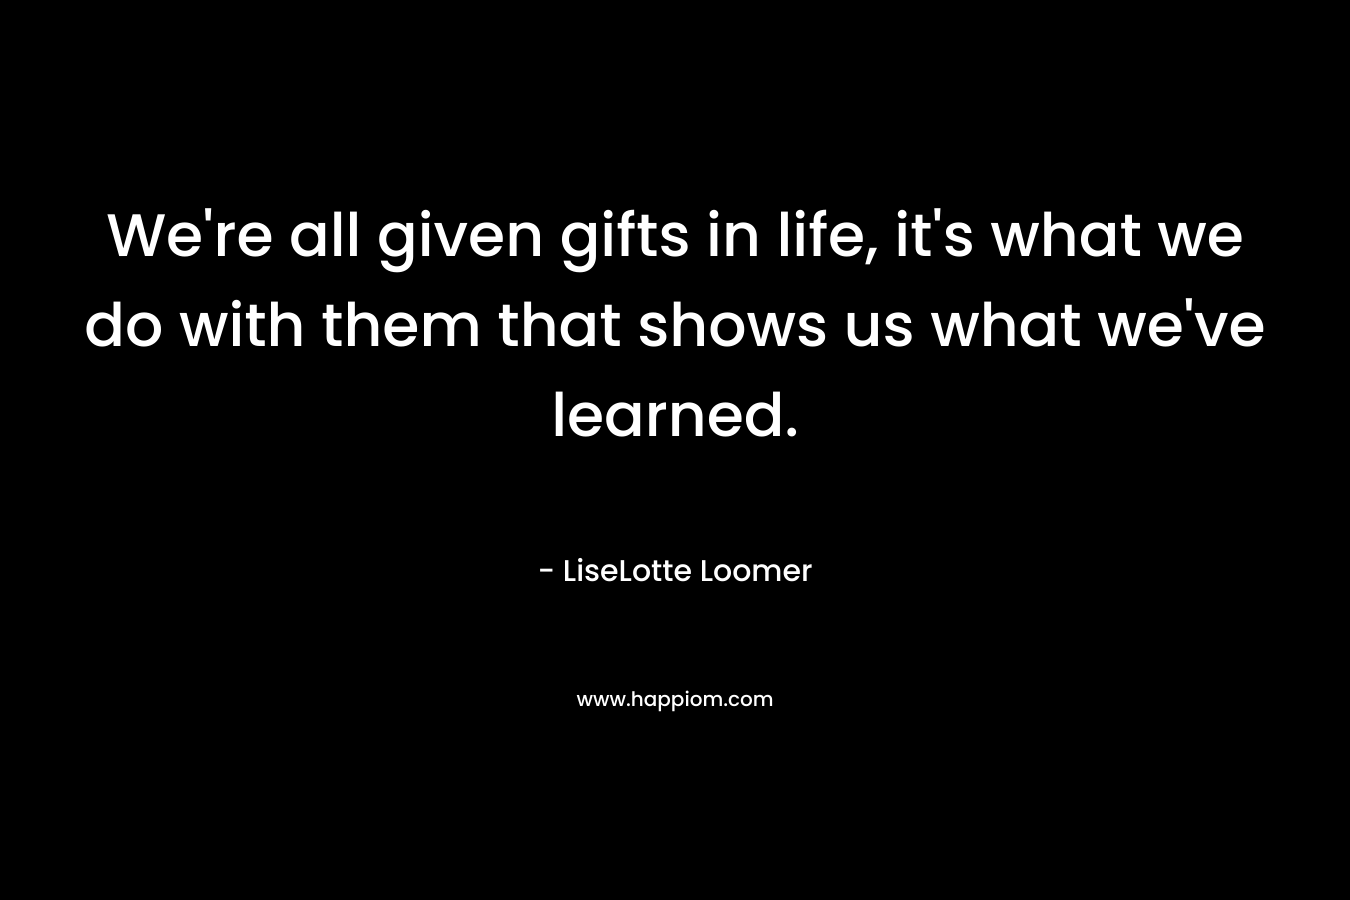 We’re all given gifts in life, it’s what we do with them that shows us what we’ve learned. – LiseLotte Loomer